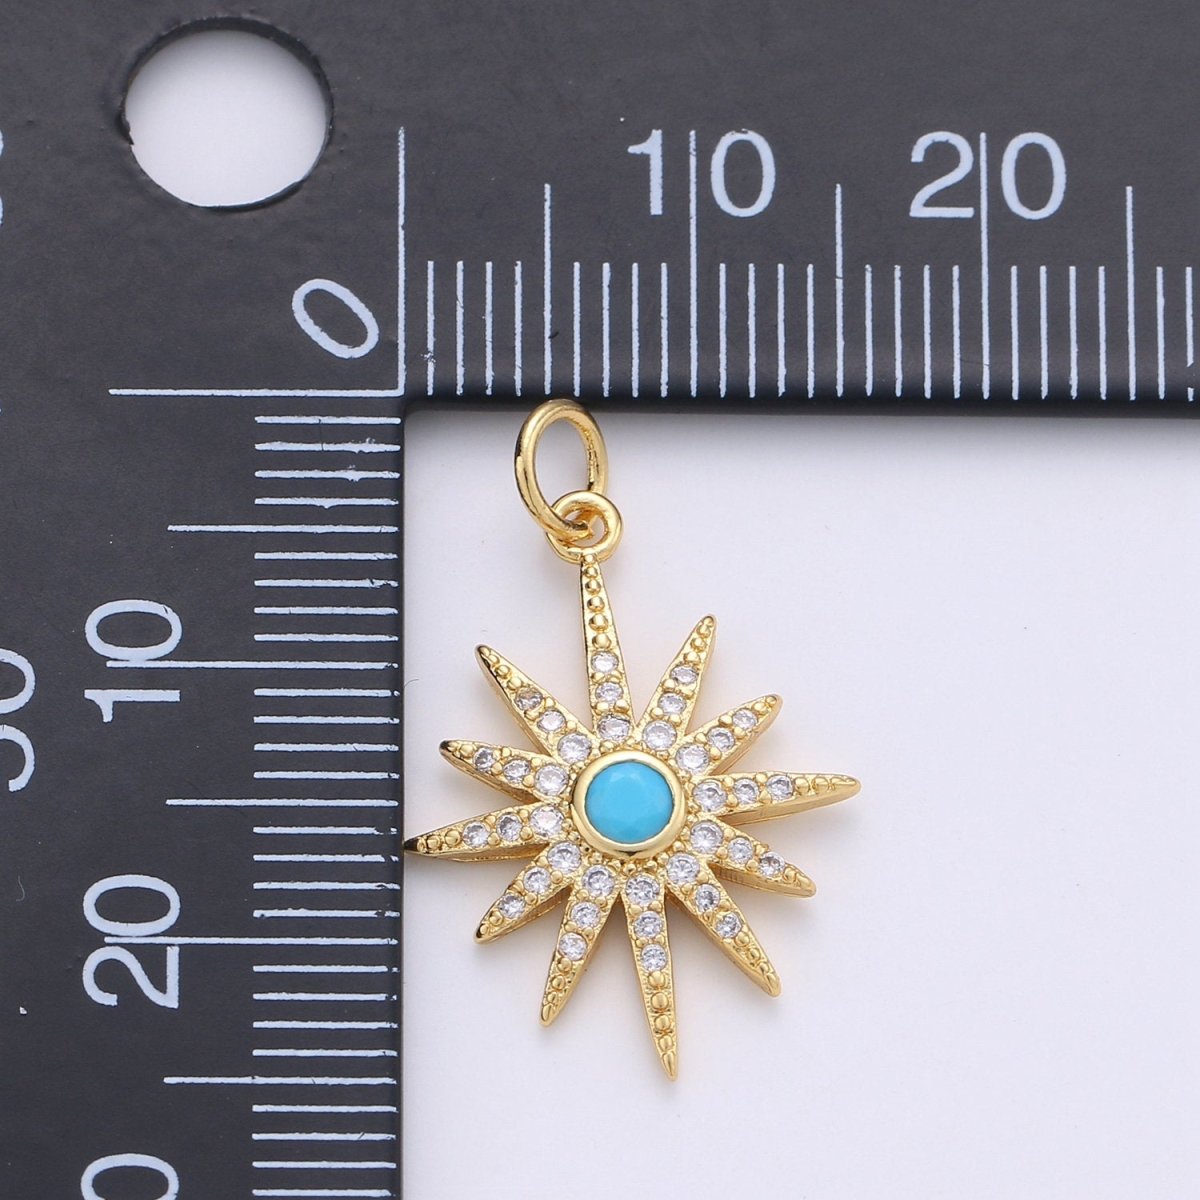 24k Gold Filled Micro Pave Star Charm, Blue North Star Moon Pendant Charm, Gold Filled Charm, For DIY Necklace Bracelet Earring D-246 - DLUXCA